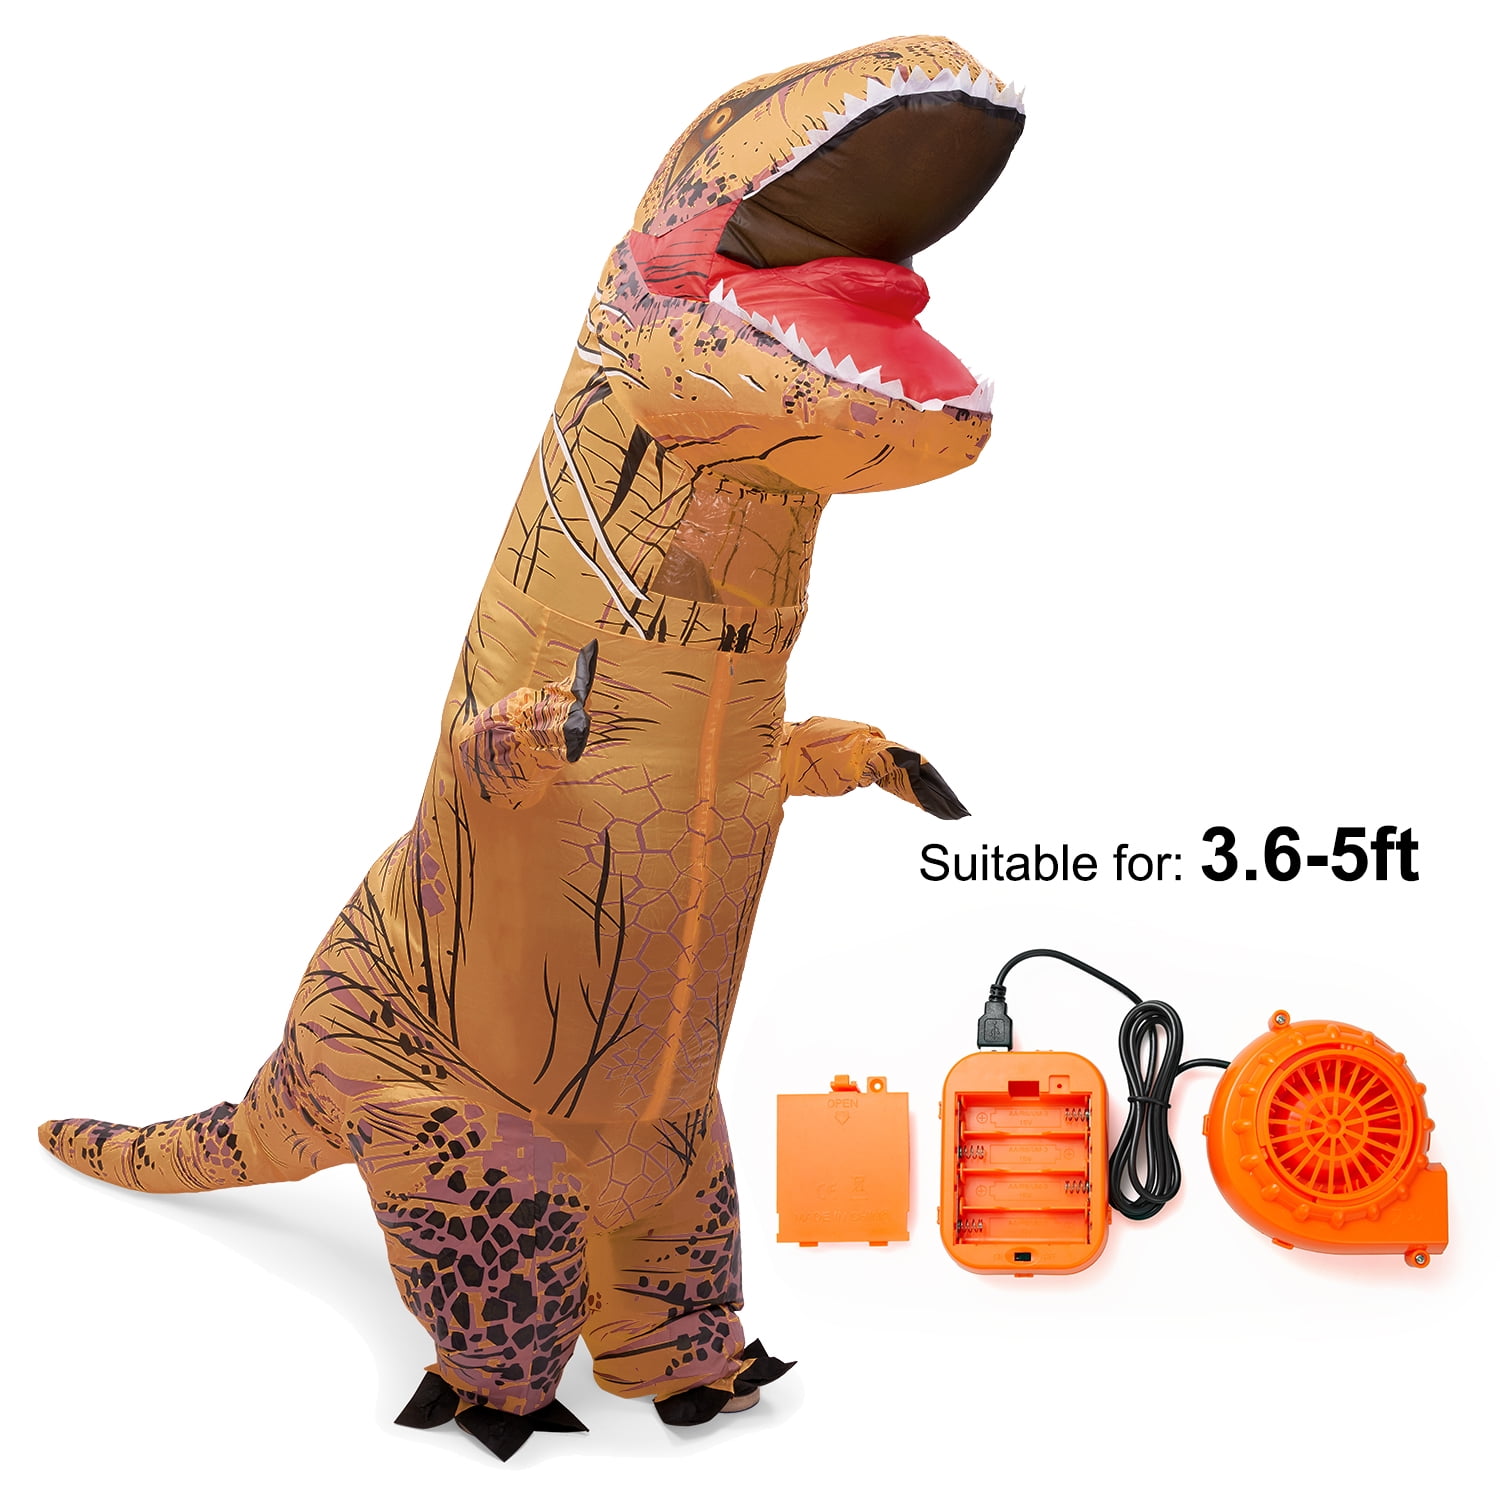 Details about   Dragon Mascot Costume Suit Cosplay Party Game Dress Outfit Halloween Adult 